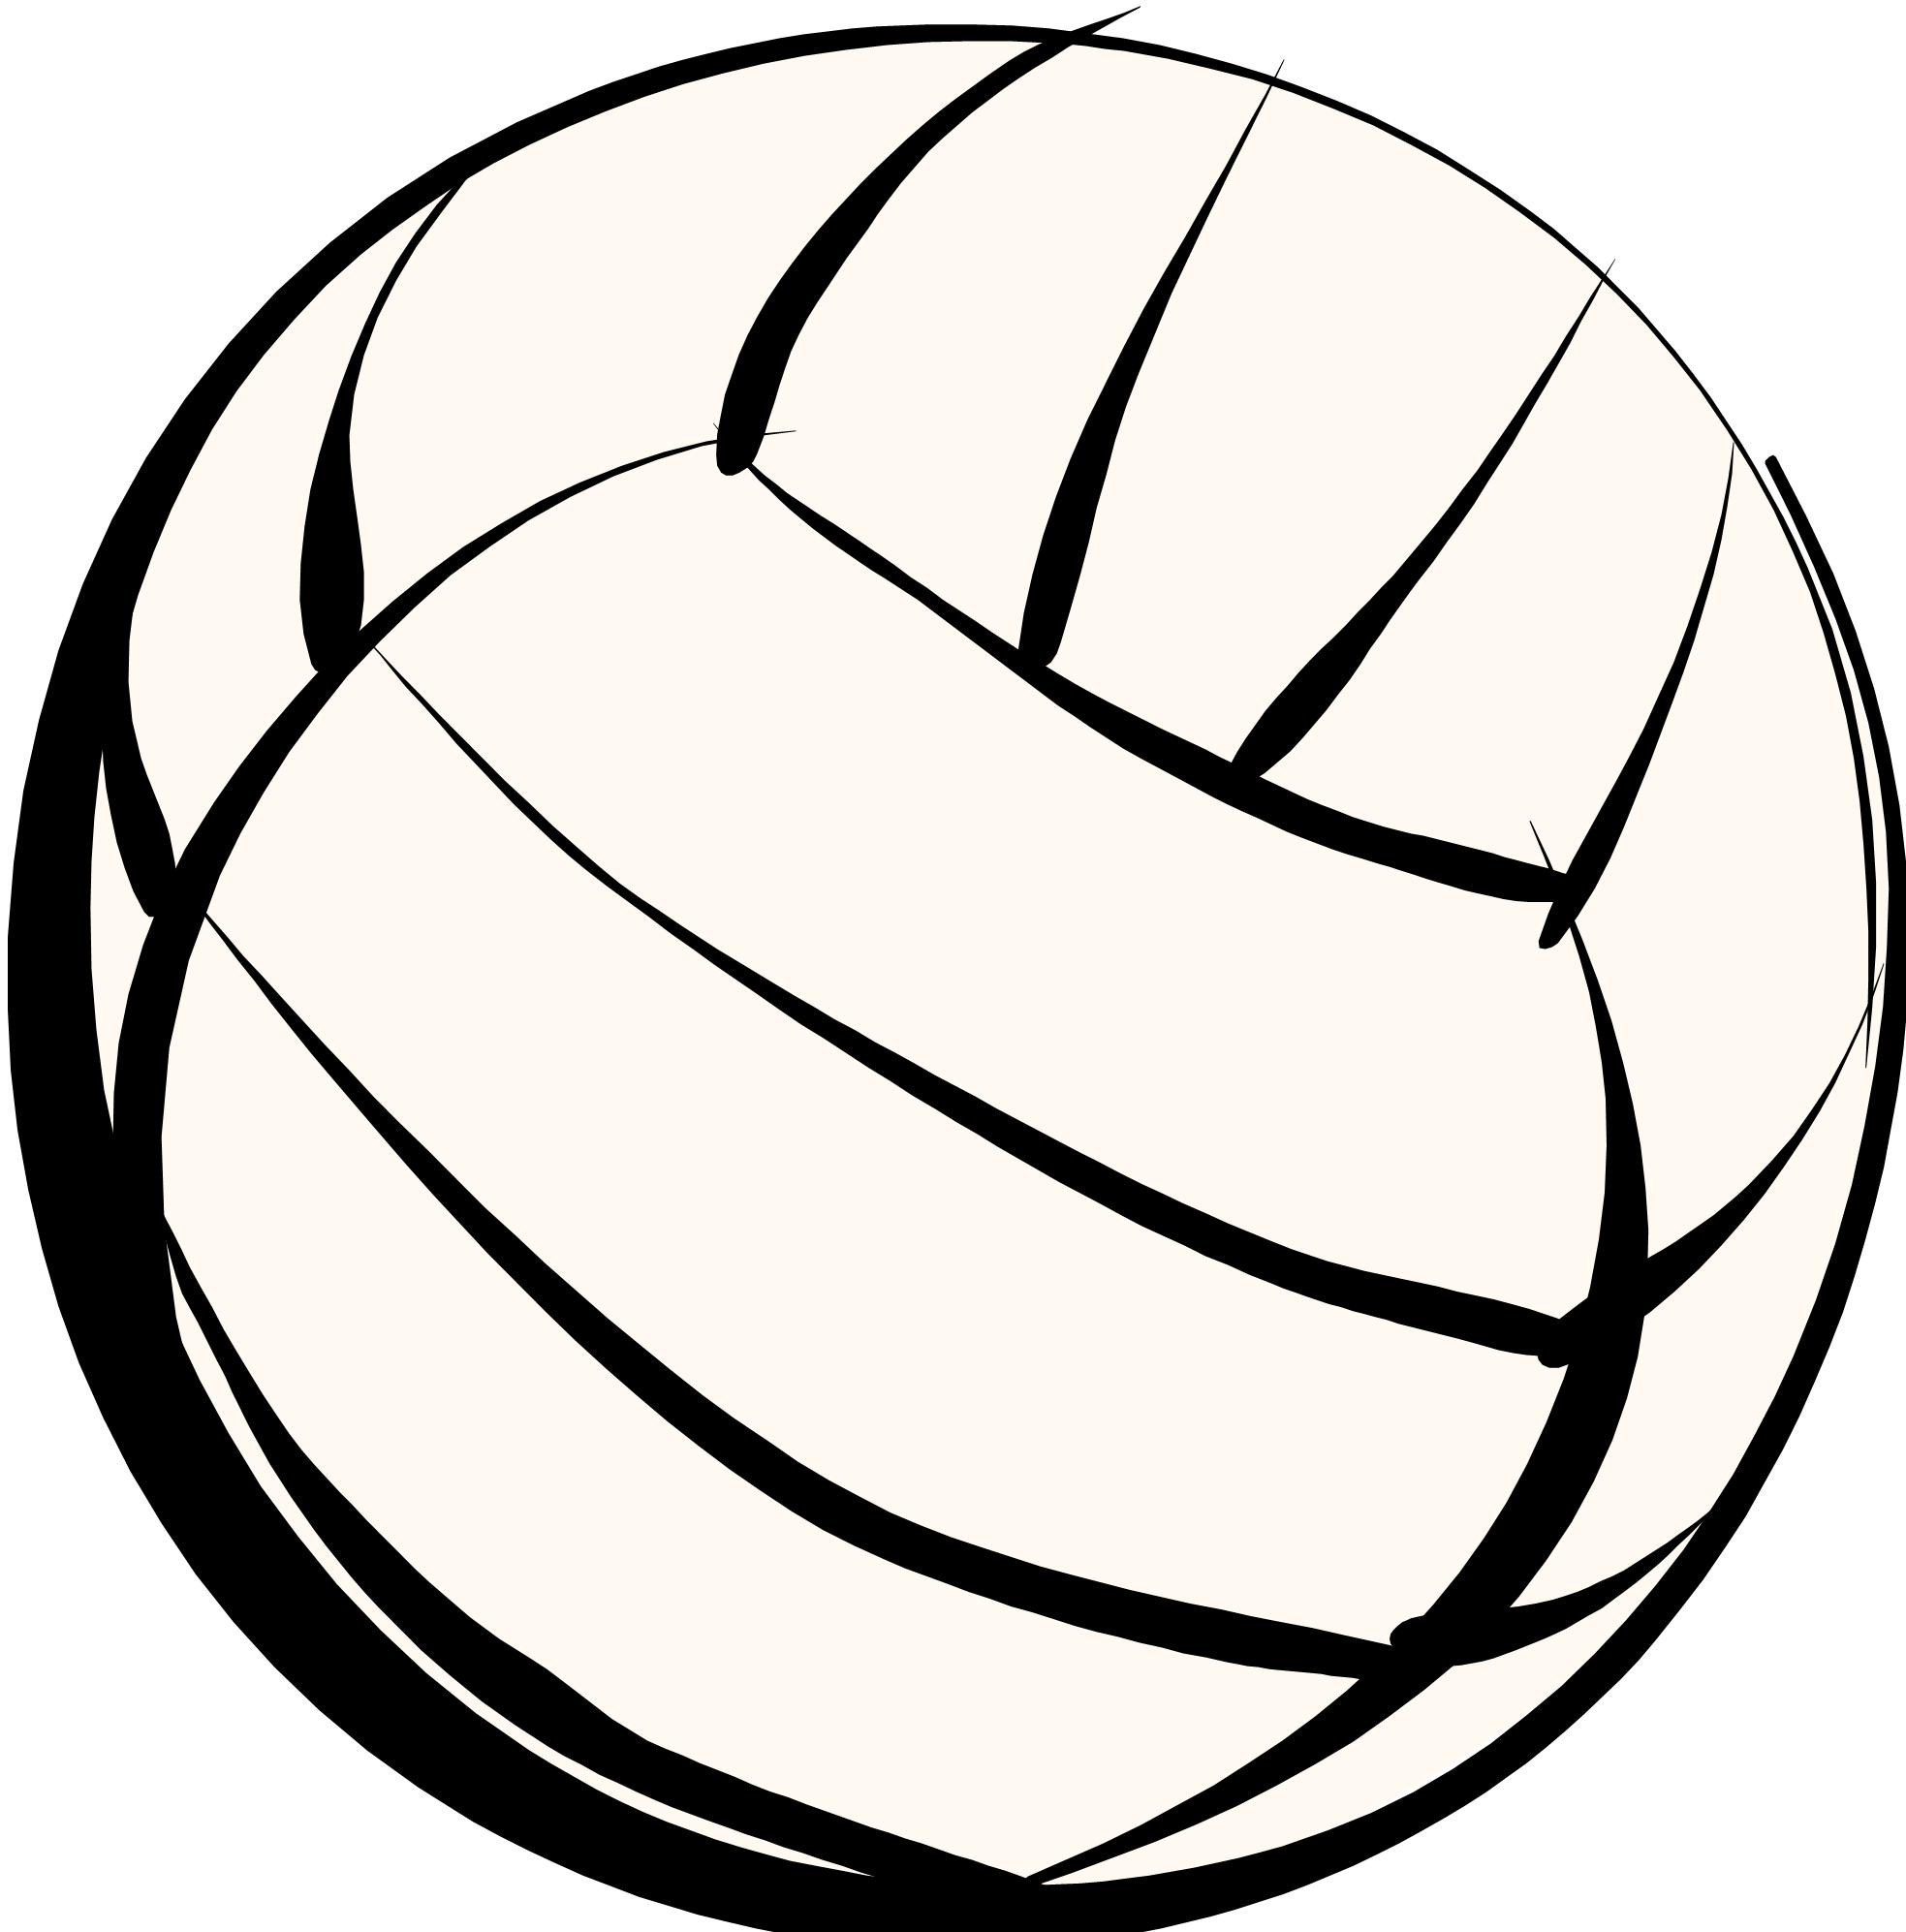 Animated Volleyball Pictures - Cliparts.co